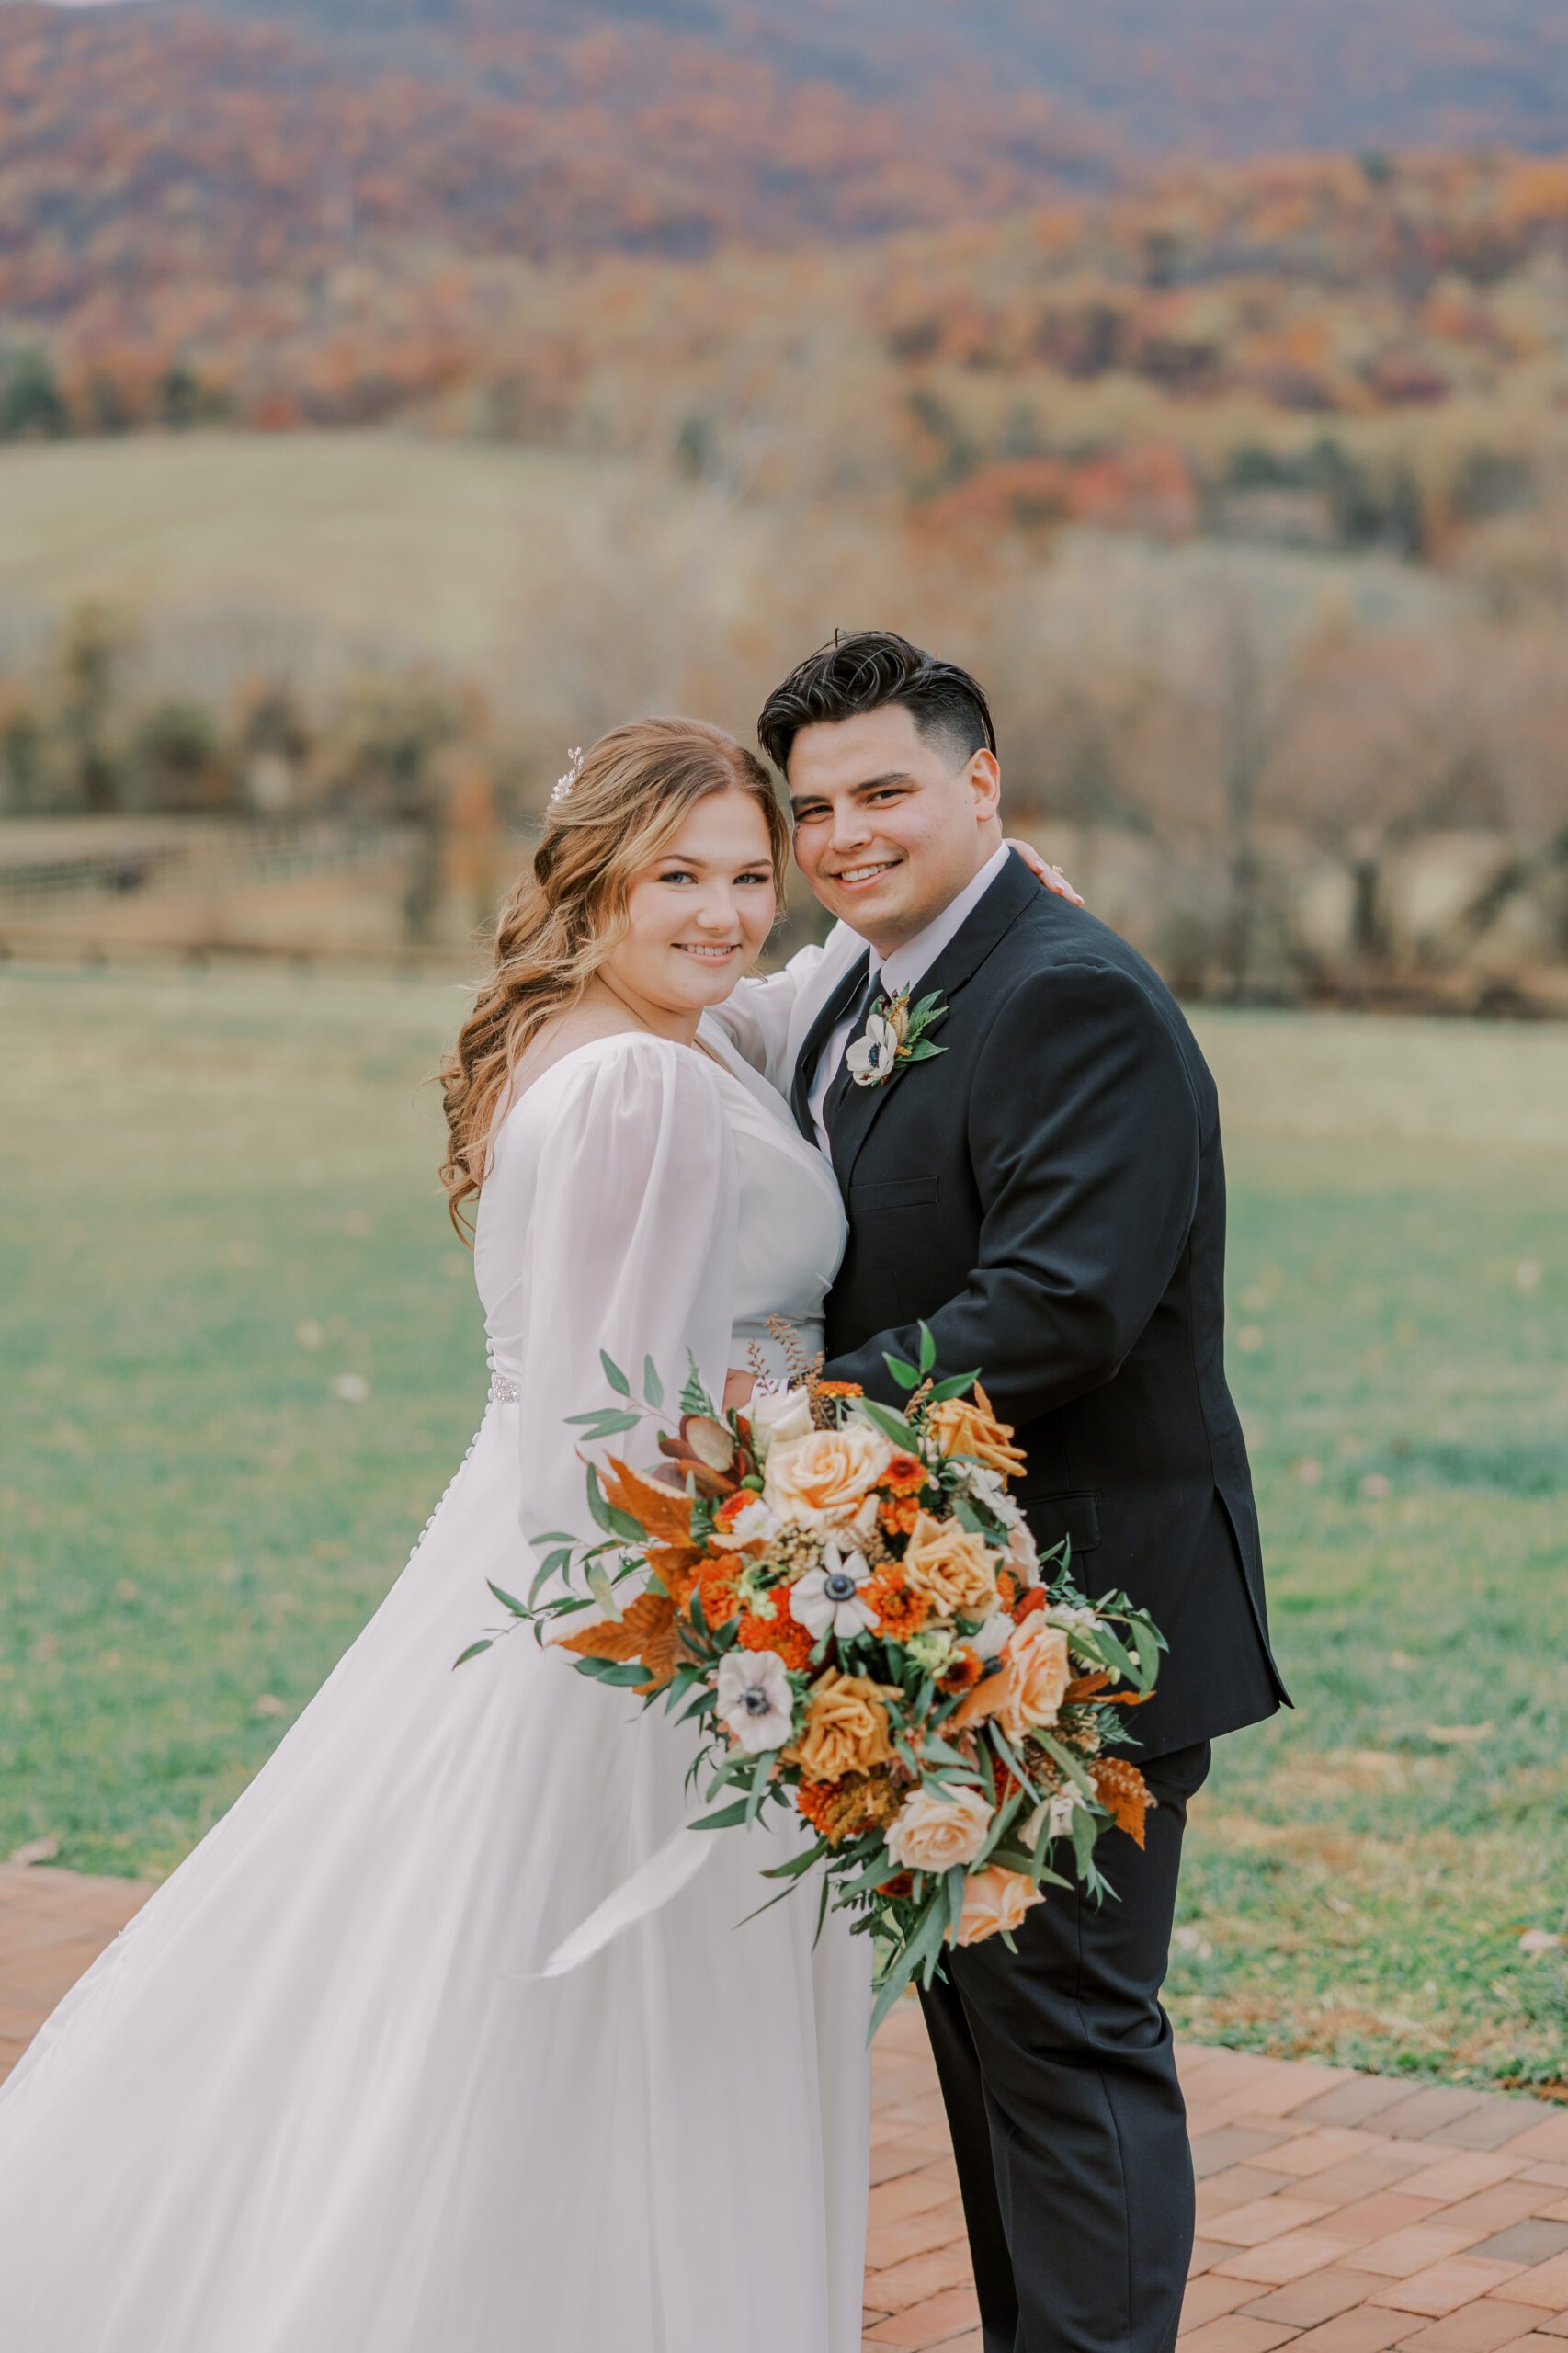 Bride and groom smiling at camera, standing outside with bride holding large floral bouquet with many white, peach, orange and green colors in it